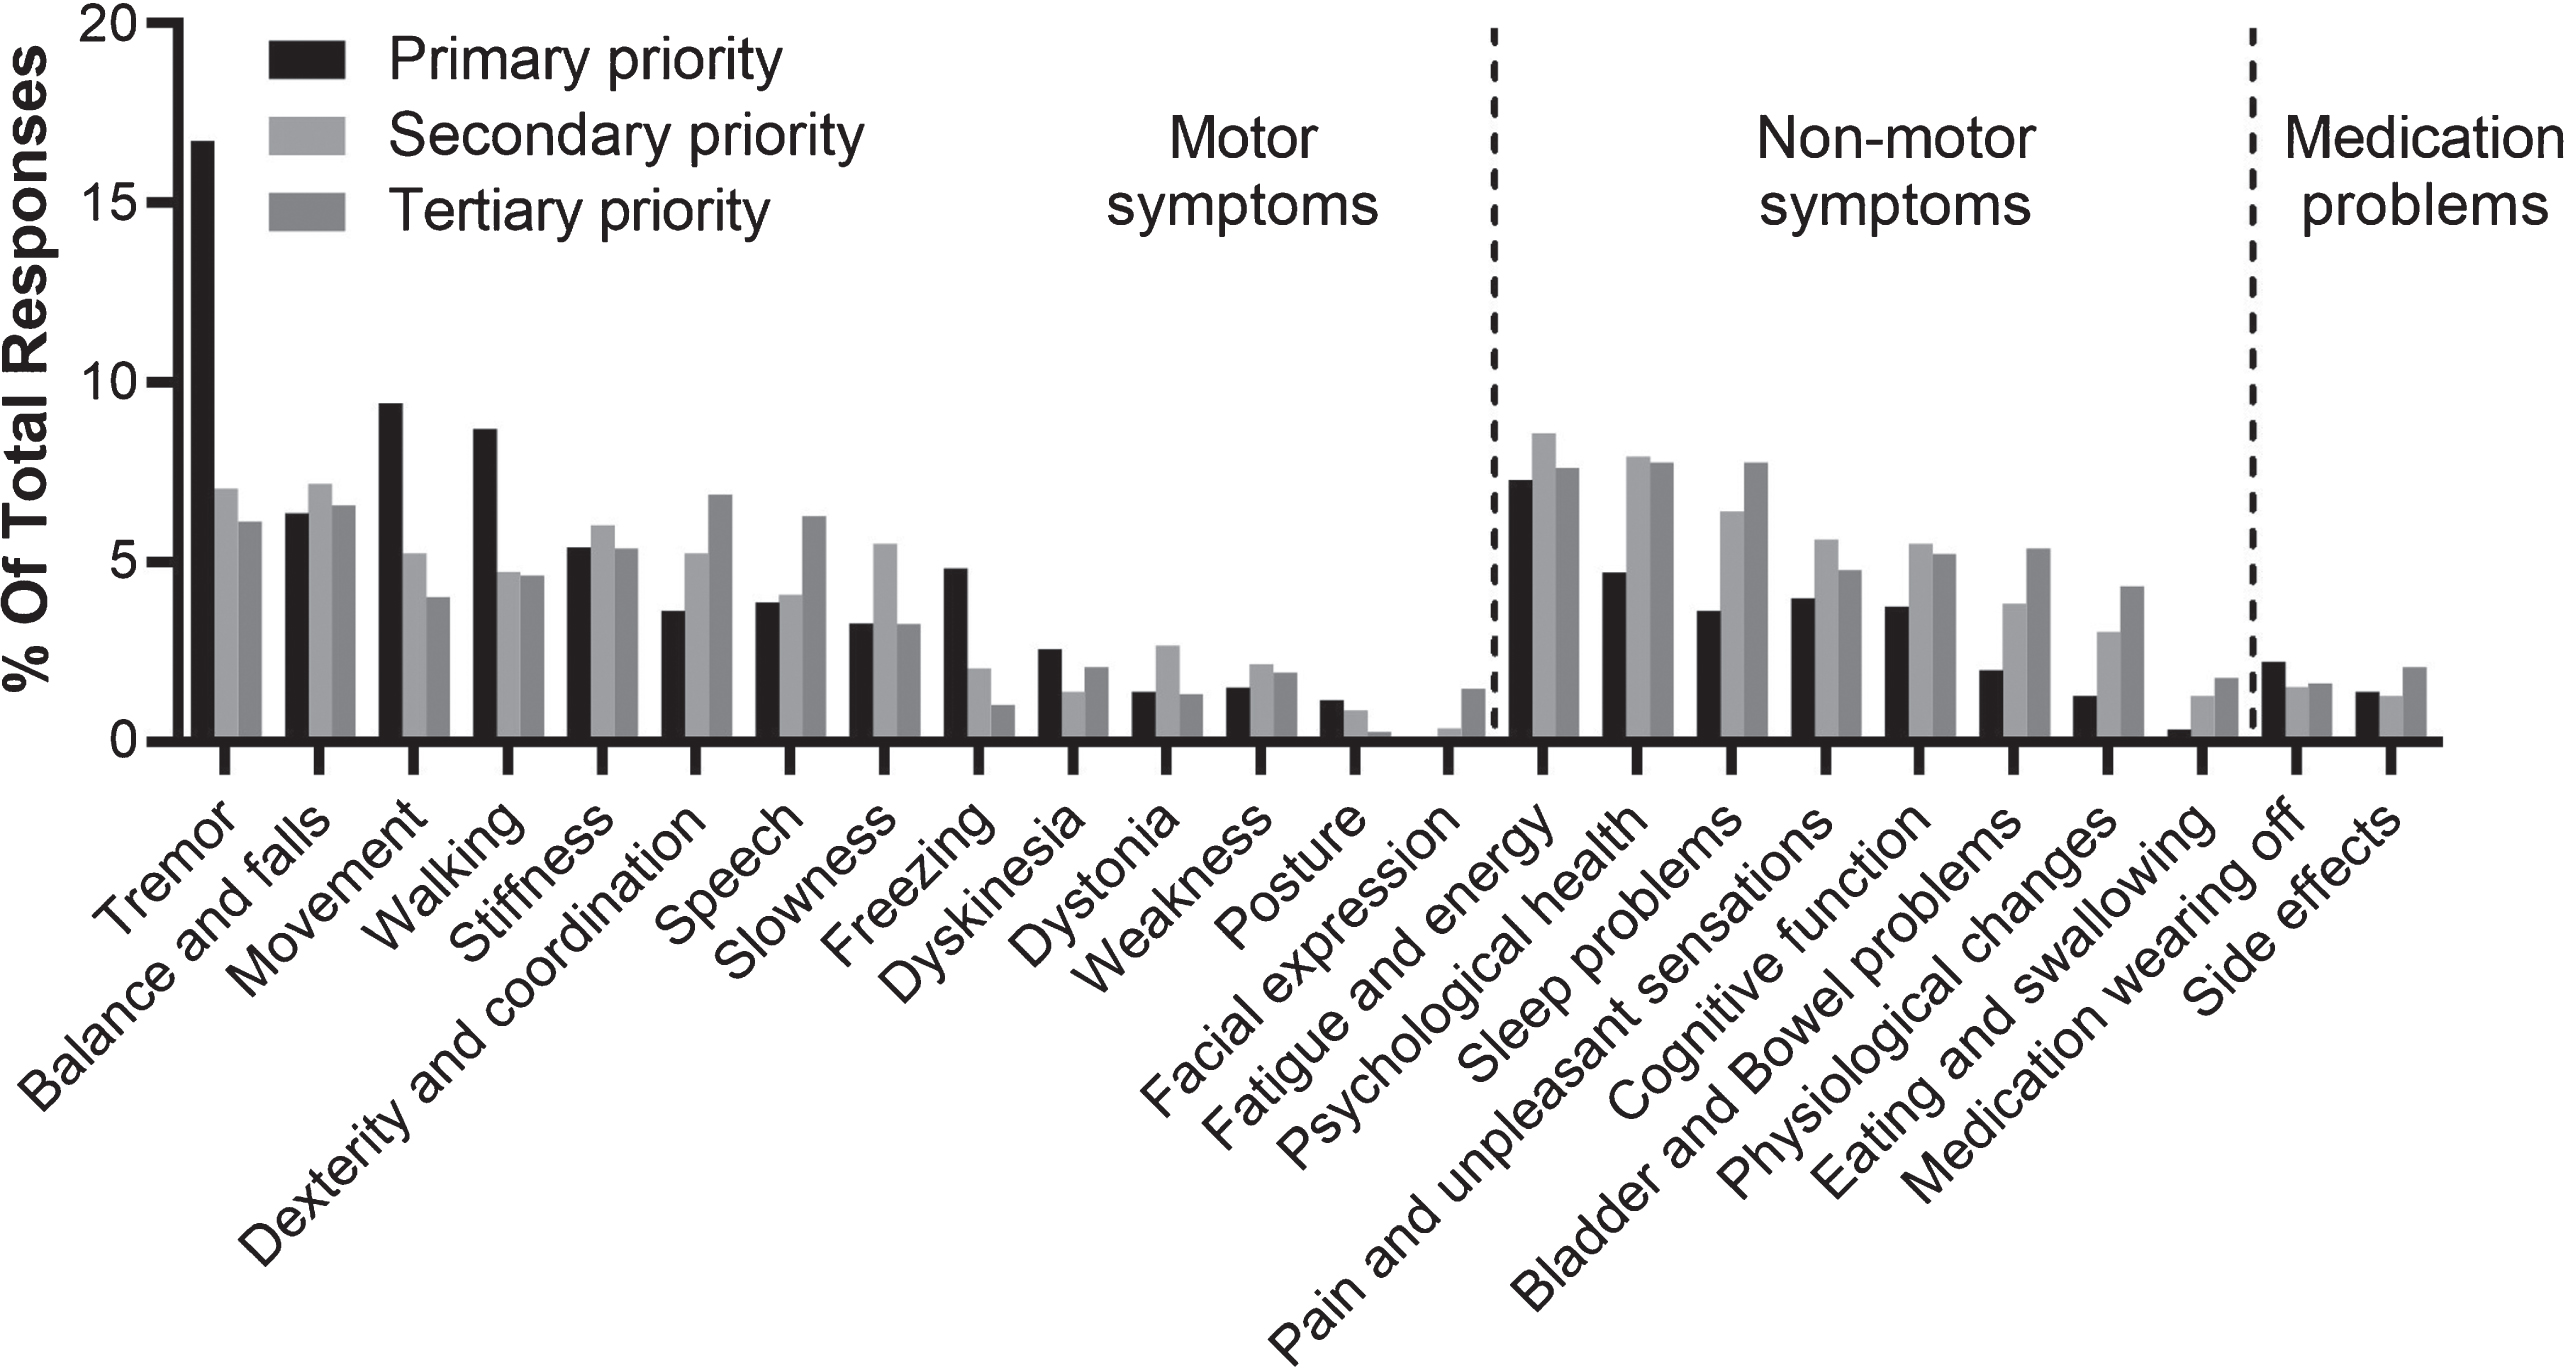 Symptoms or side effects reported in response to the question “what aspect of Parkinson’s do you most wish to see improvement in?” presented by priority. Percentages show the relative frequency of symptoms or side effects reported within primary responses (n = 848), secondary responses (n = 779), and tertiary responses (n = 668).